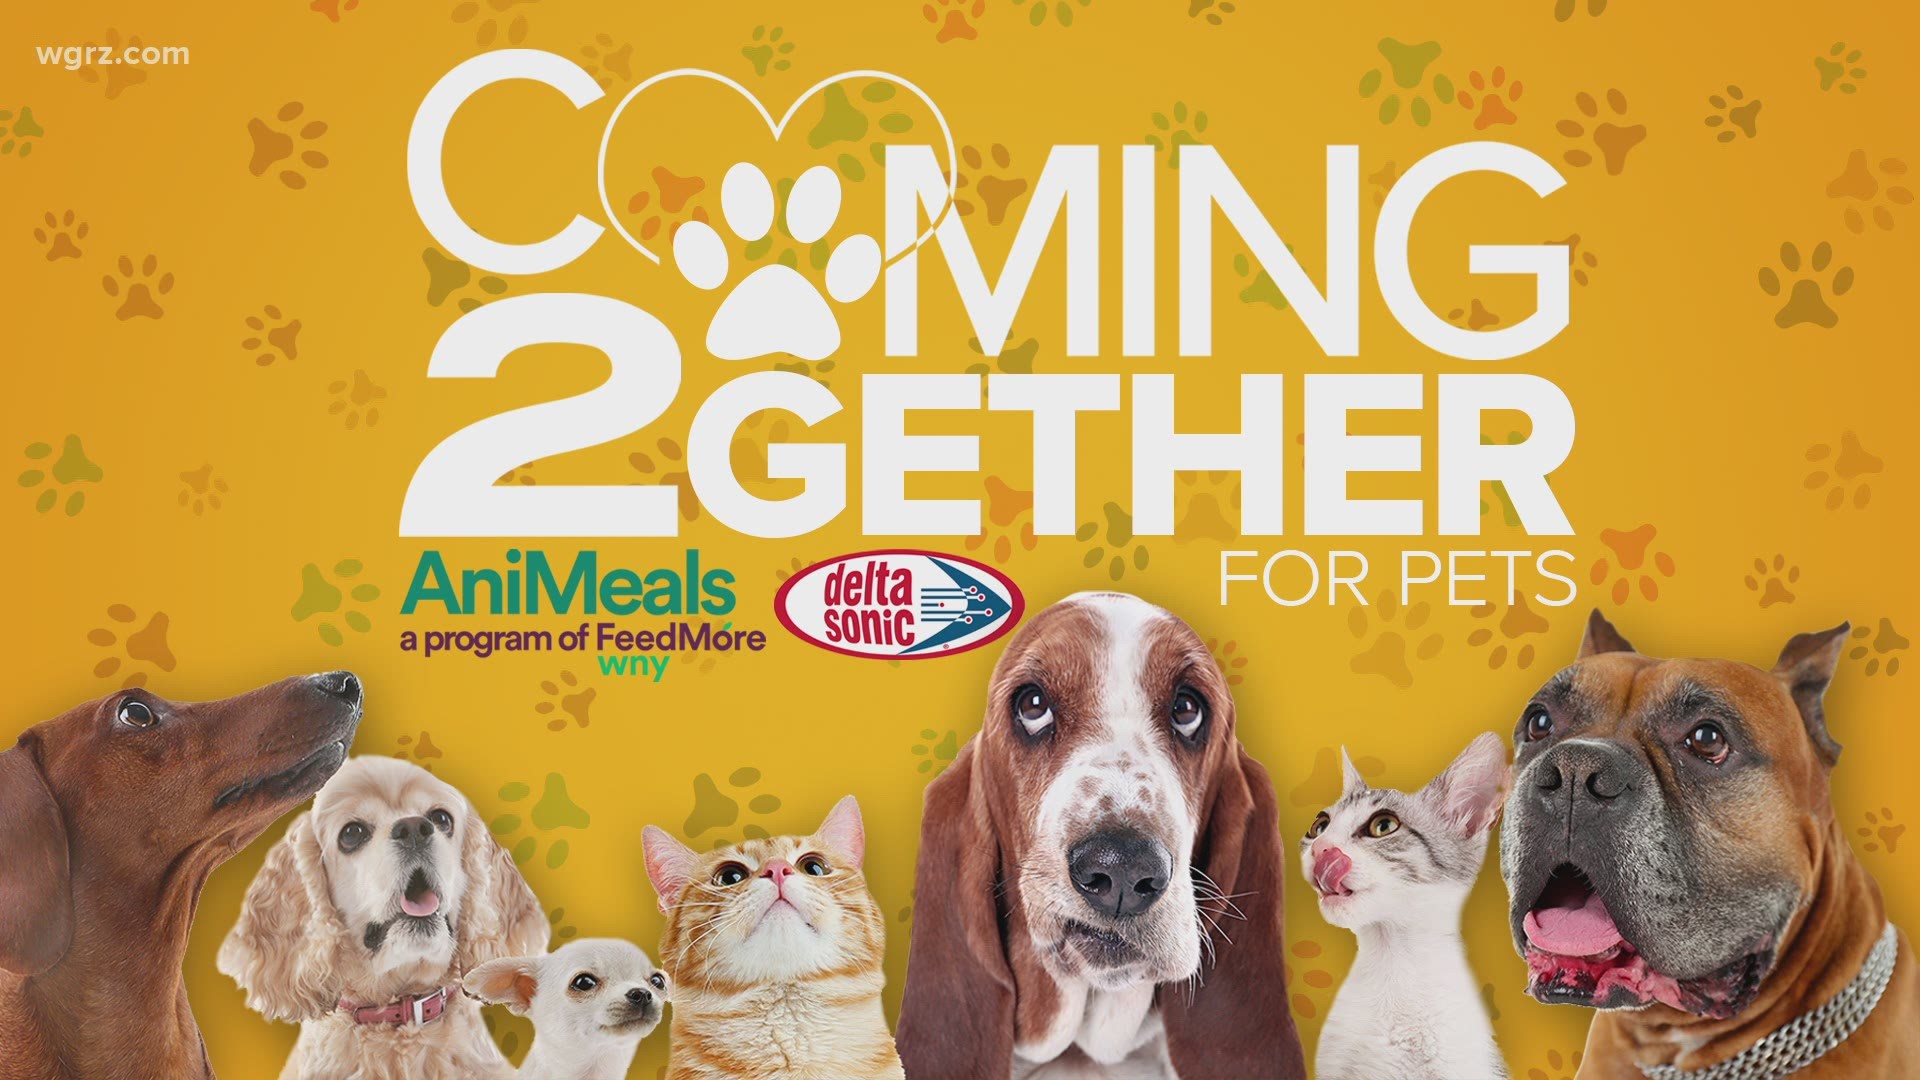 In less than a week, 2 On Your Side is partnering with FeedMore Western New York and Delta Sonic for the "Coming 2gether" pet food and donation drive.